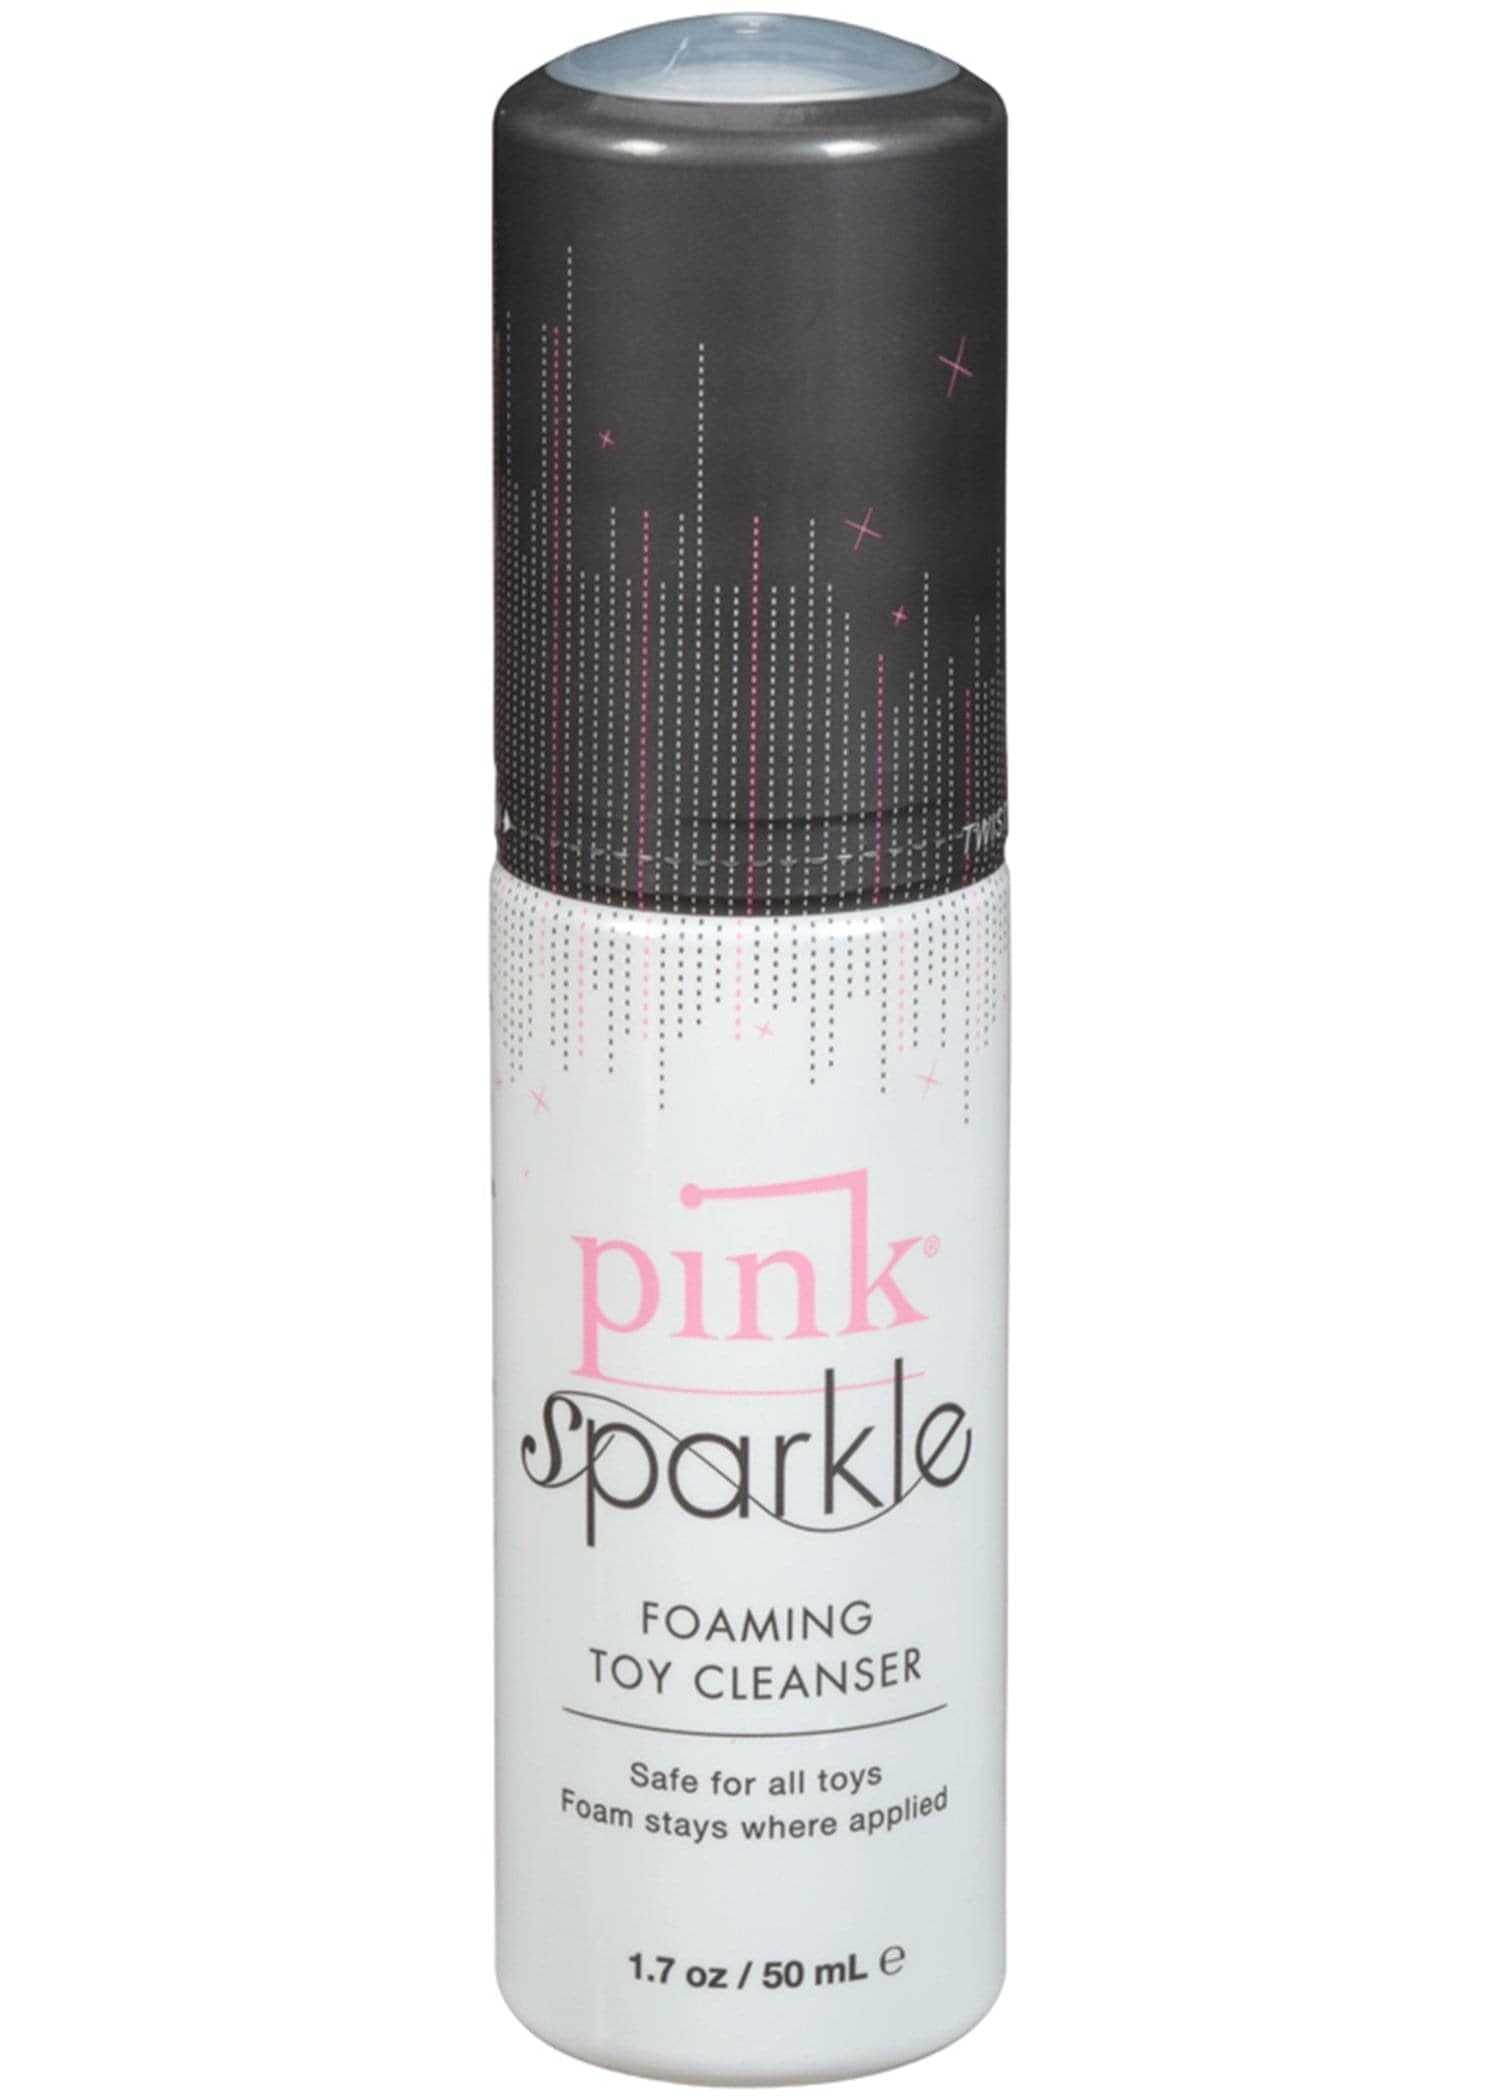 pink sparkle foaming toy cleaner 1 7 oz